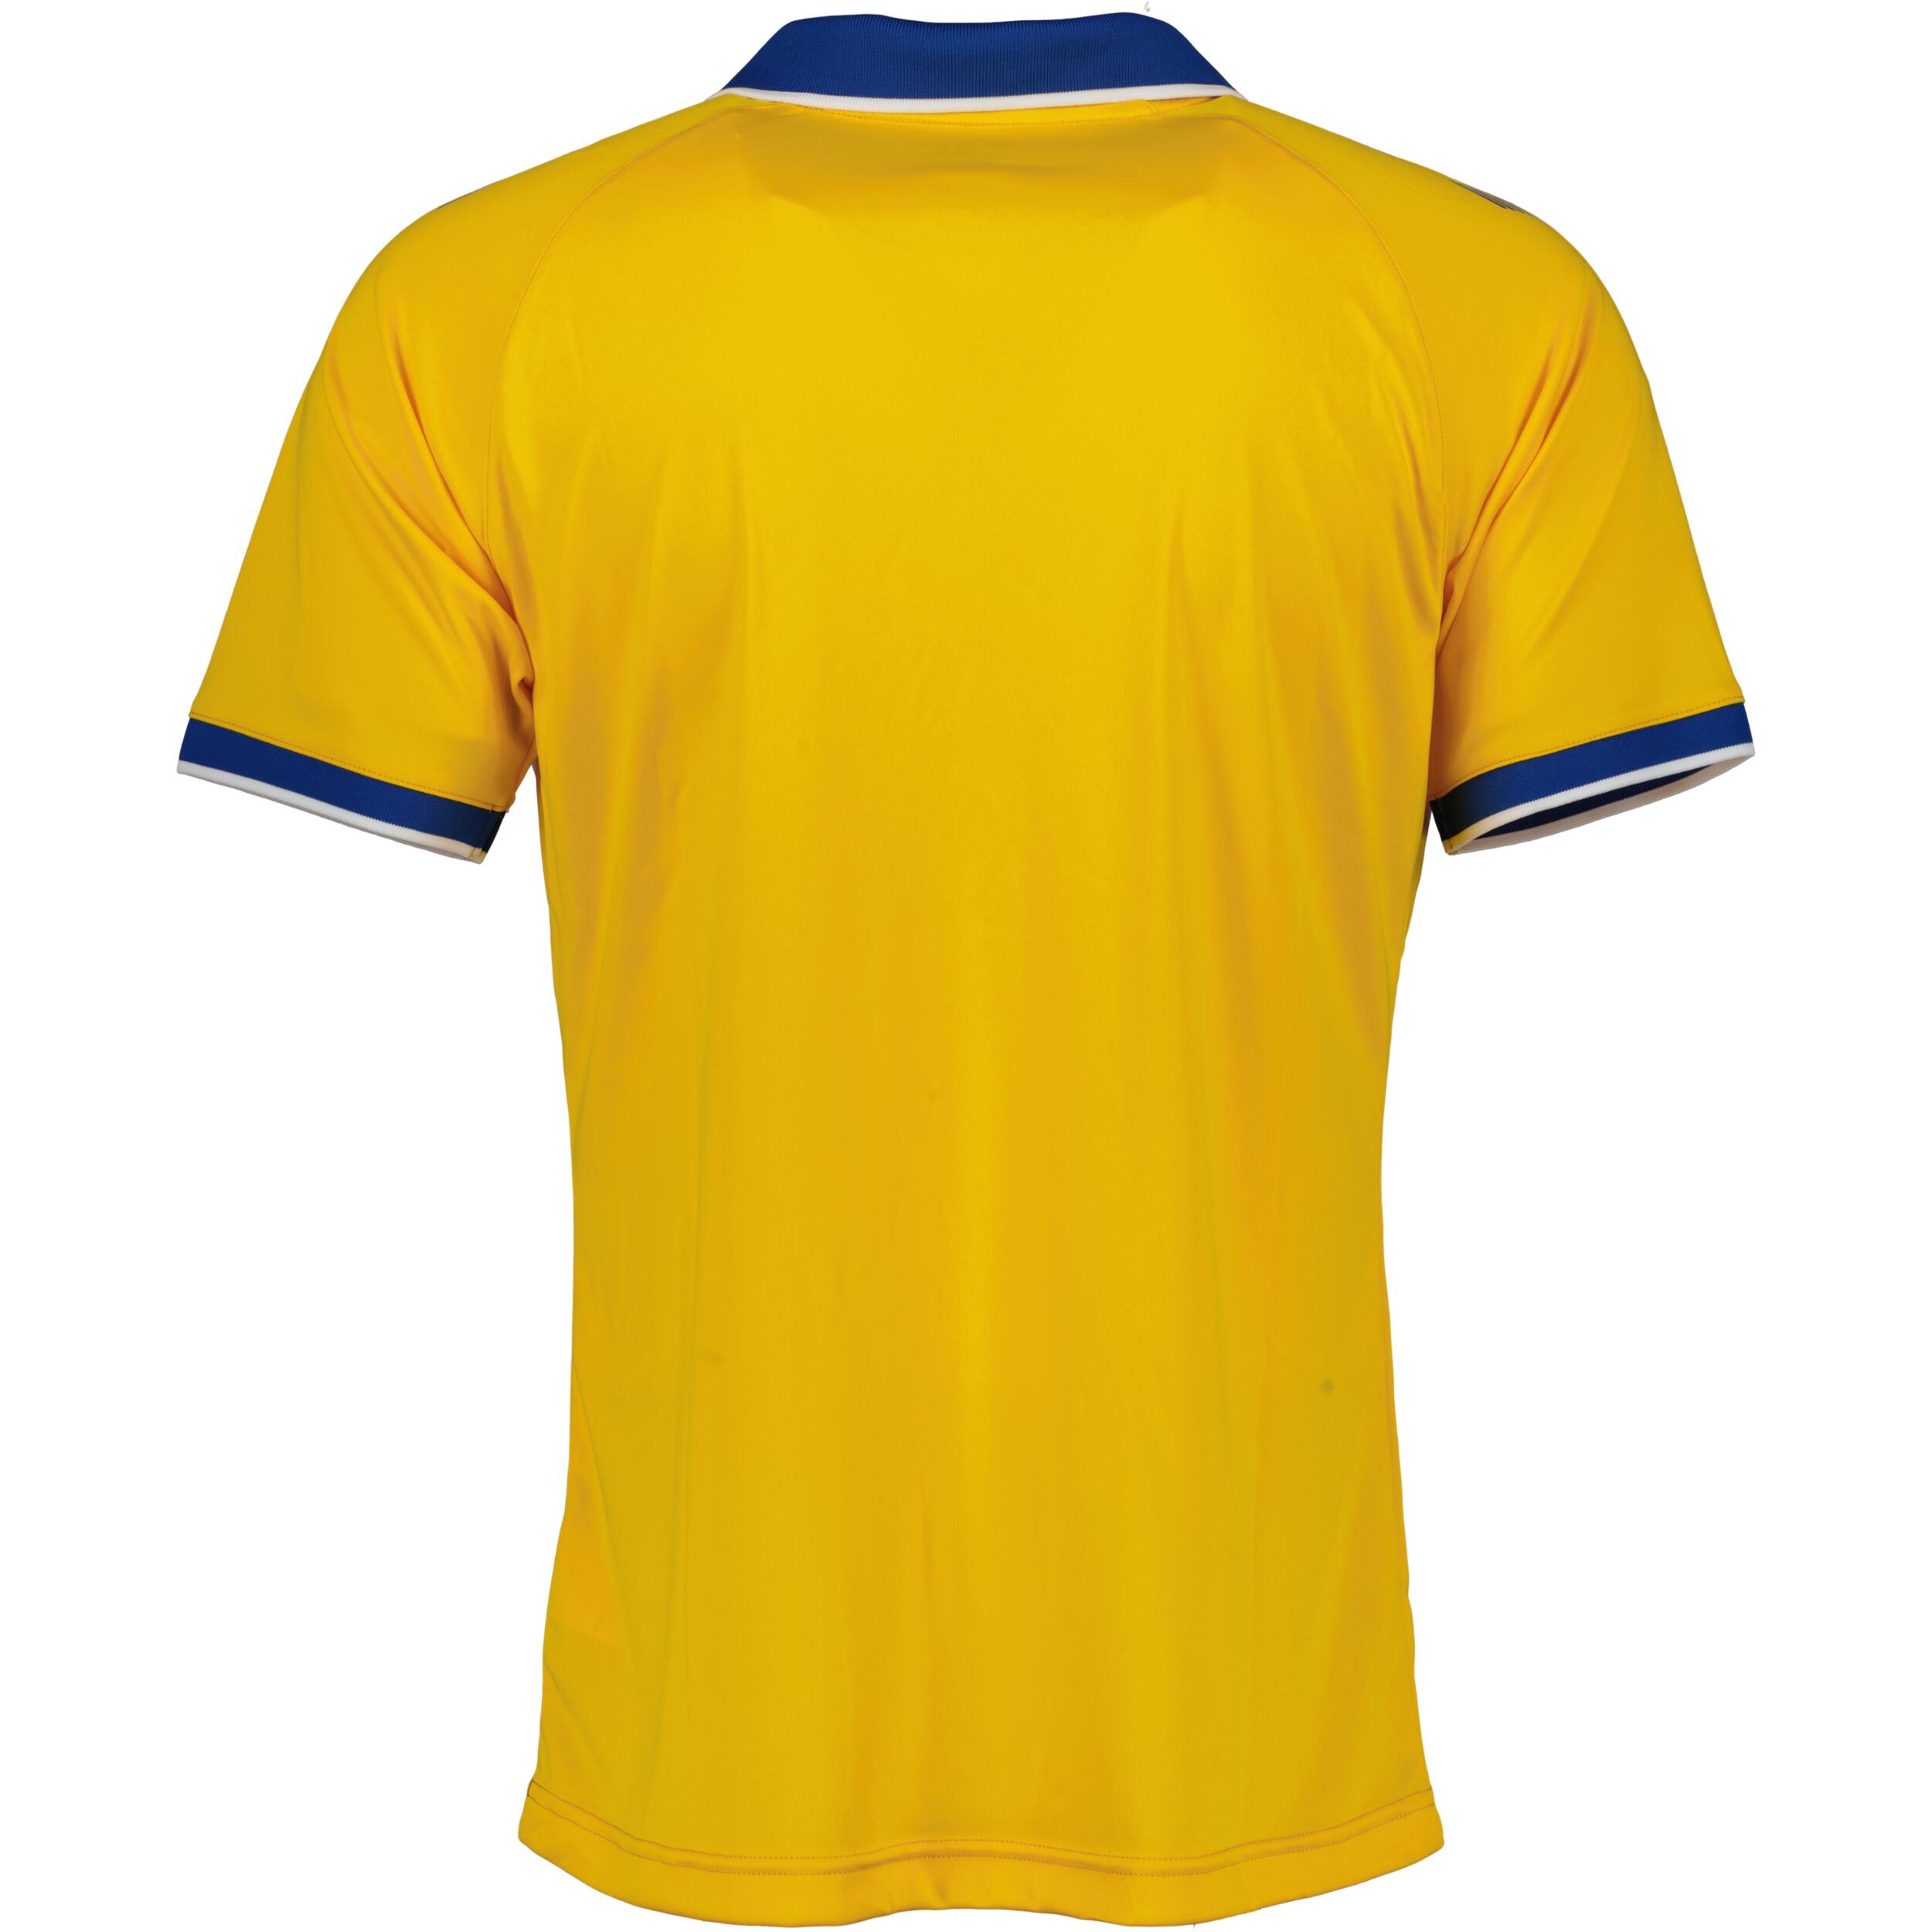 Impact jersey for juniors, great for football, in blue/sports yellow 2/3